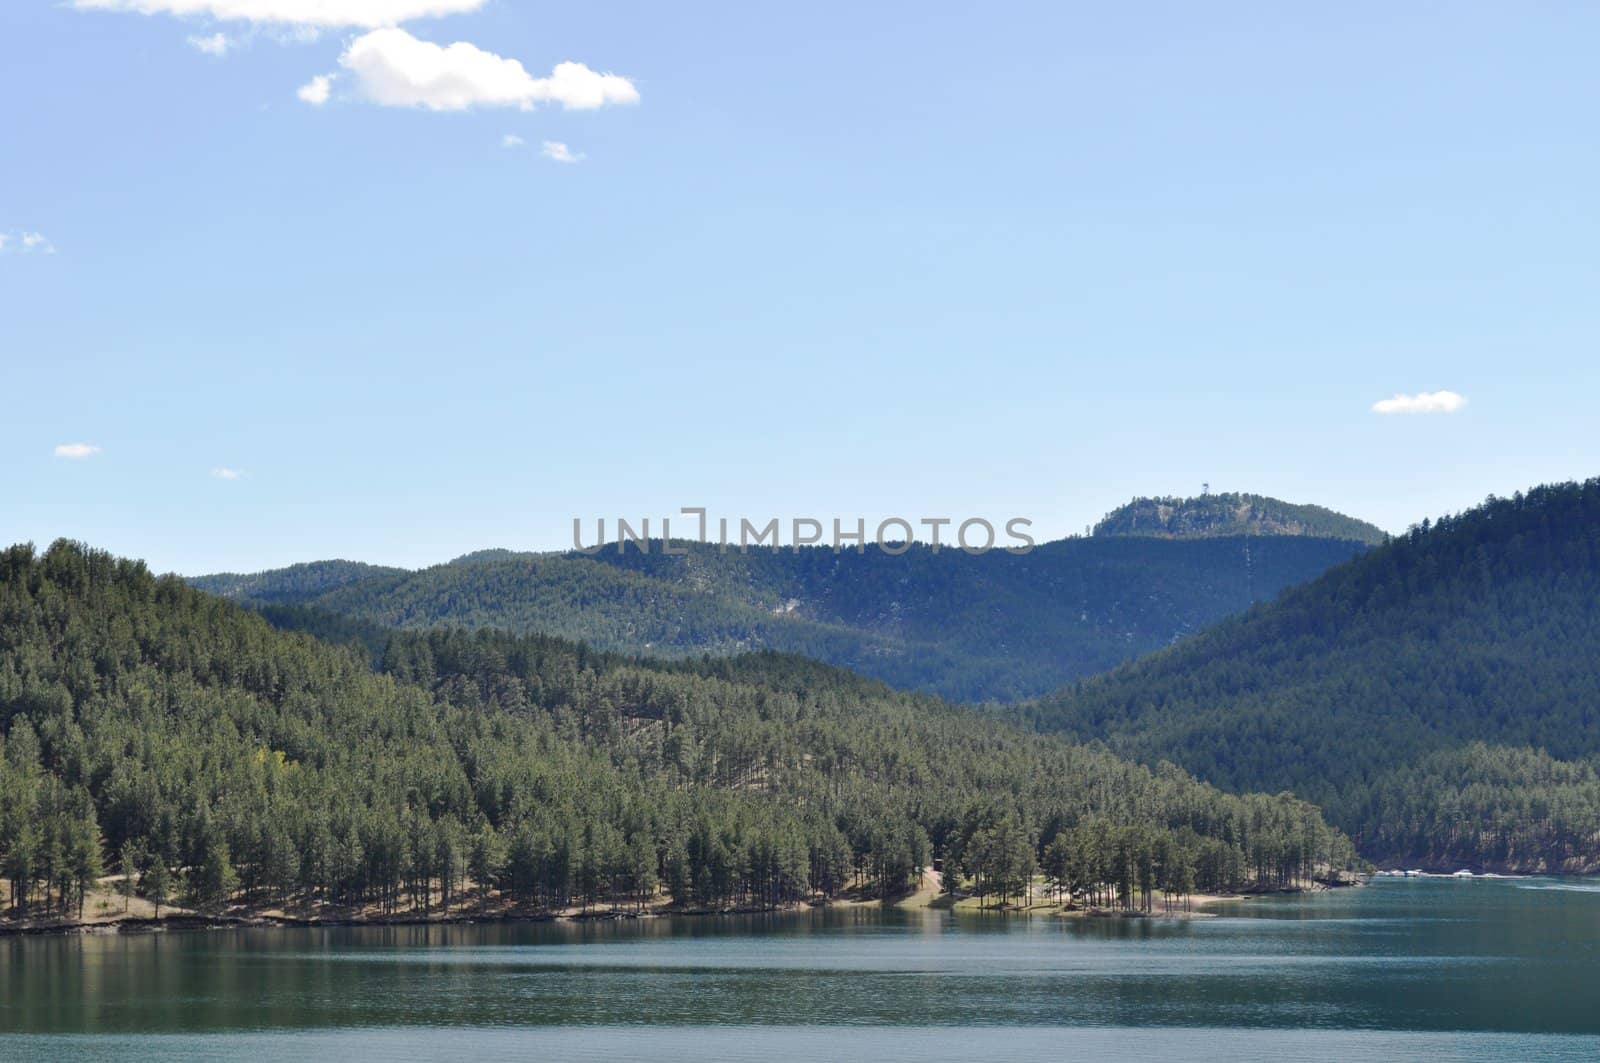 Black hills and water background by RefocusPhoto